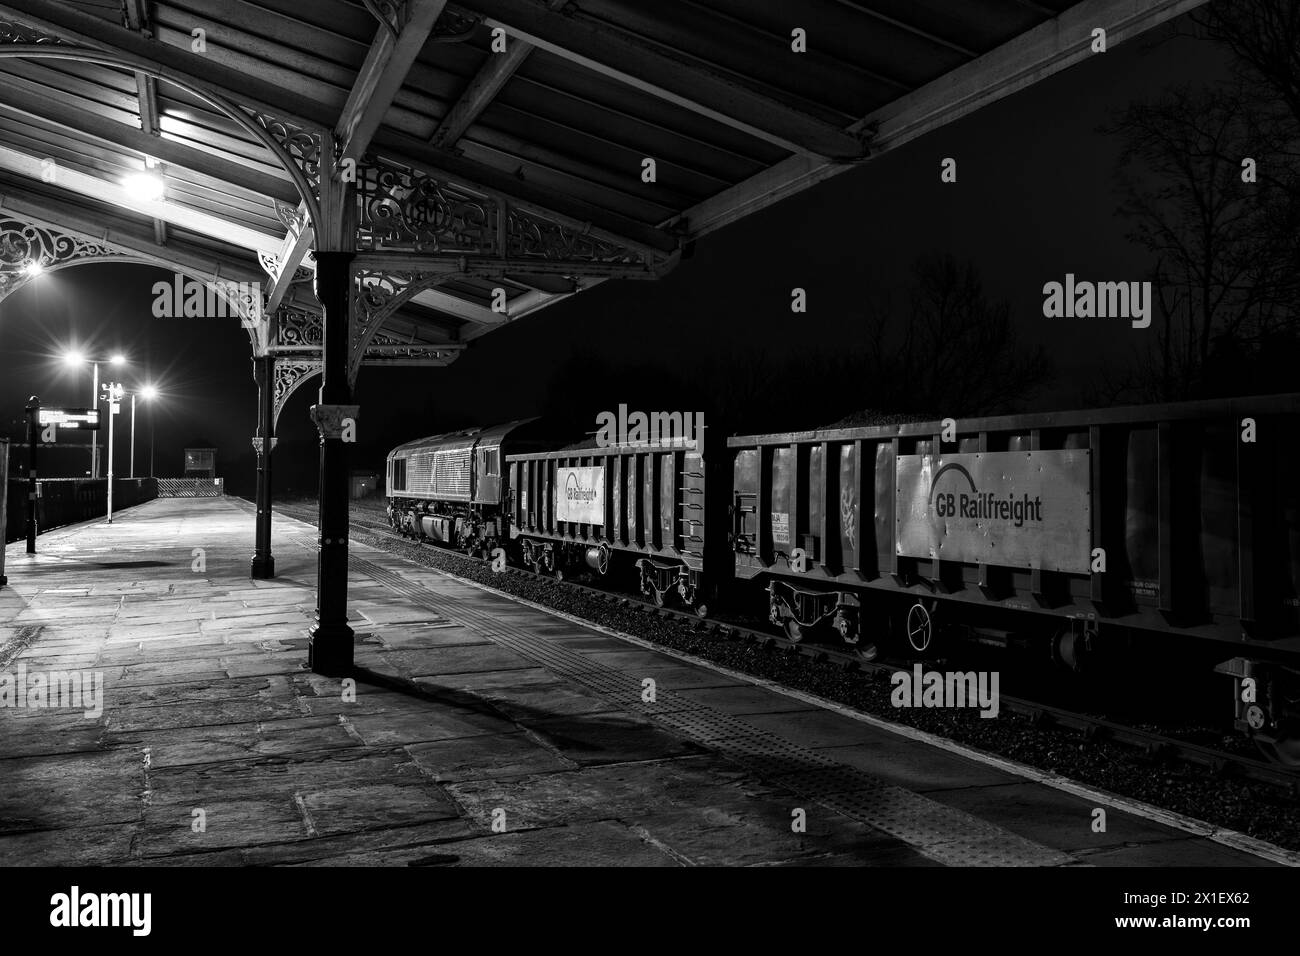 GB Rail Freight class 66 locomotive 66718 under the Midland Railway canopy at  Hellifield  railway station with a train carrying aggregates at night Stock Photo